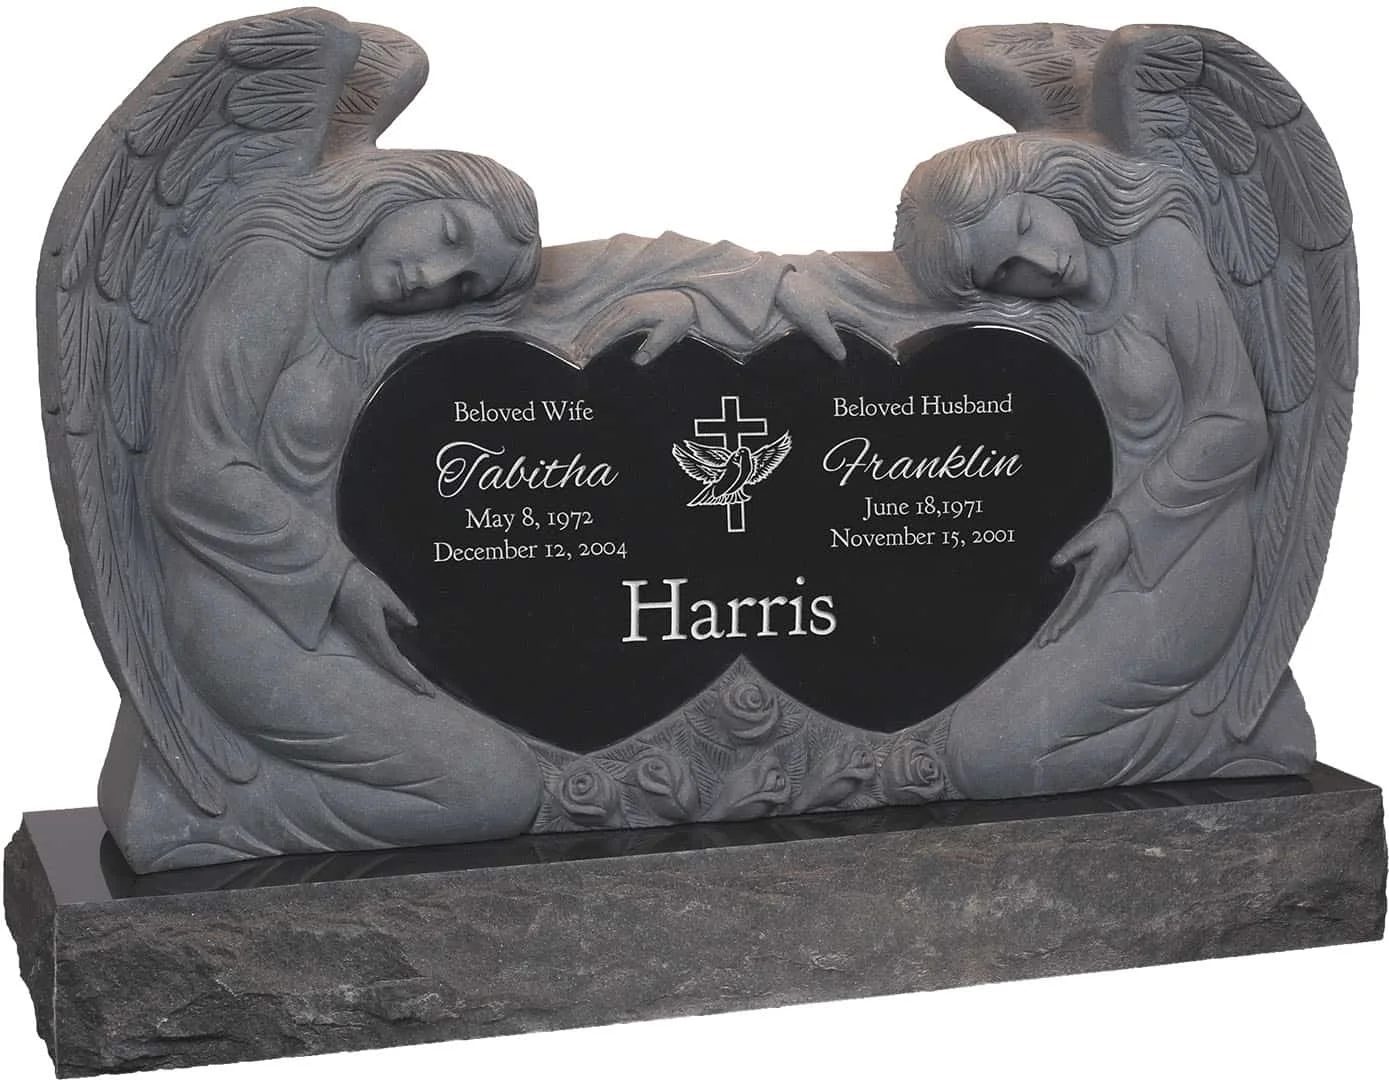 White Grave Stone Burial Monument Double Heart Shaped Carved Granite Headstone Tombstone